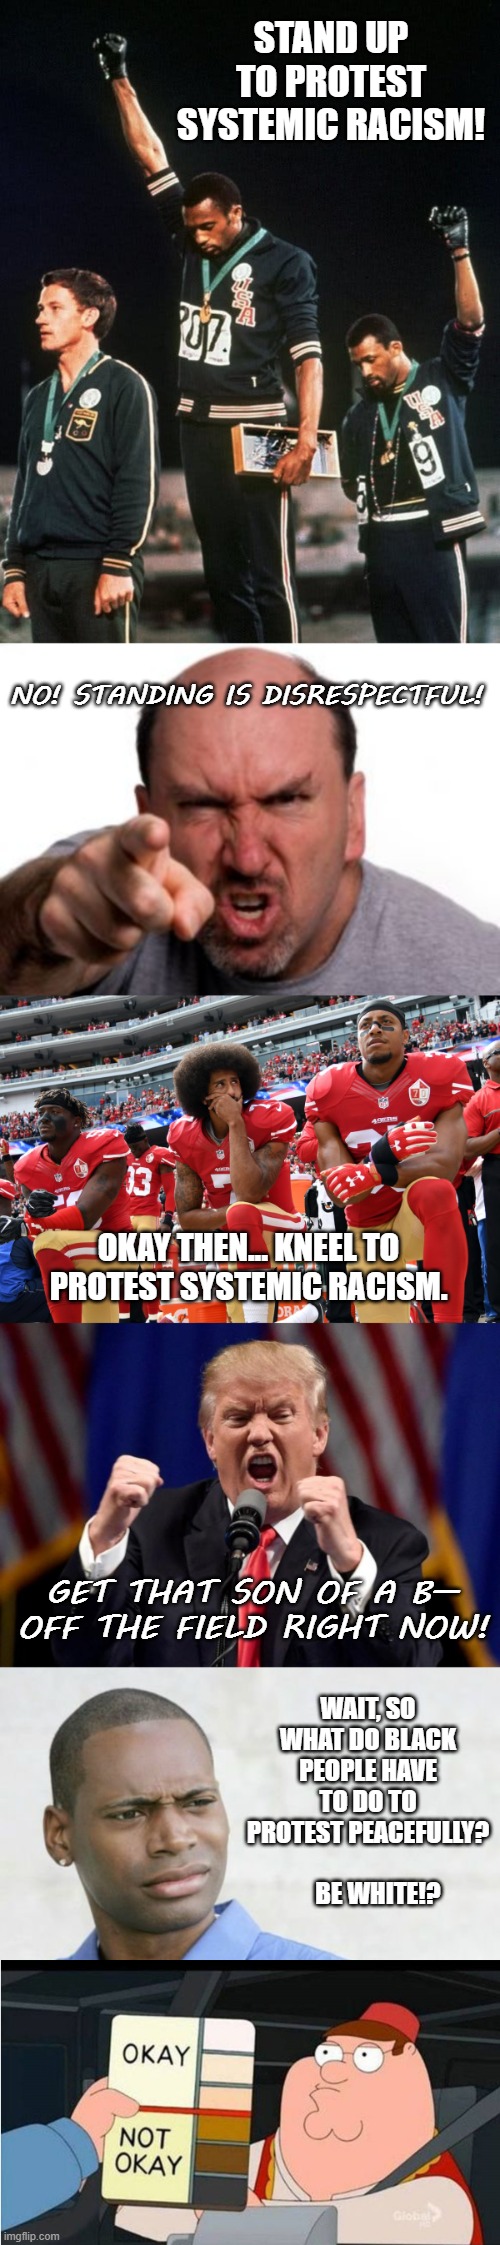 Why white people must speak out against racism | STAND UP TO PROTEST SYSTEMIC RACISM! NO! STANDING IS DISRESPECTFUL! OKAY THEN... KNEEL TO PROTEST SYSTEMIC RACISM. GET THAT SON OF A B— OFF THE FIELD RIGHT NOW! WAIT, SO WHAT DO BLACK PEOPLE HAVE TO DO TO PROTEST PEACEFULLY?              BE WHITE!? | image tagged in angry white man,angry trump,family guy racist,racism,protest,white privilege | made w/ Imgflip meme maker